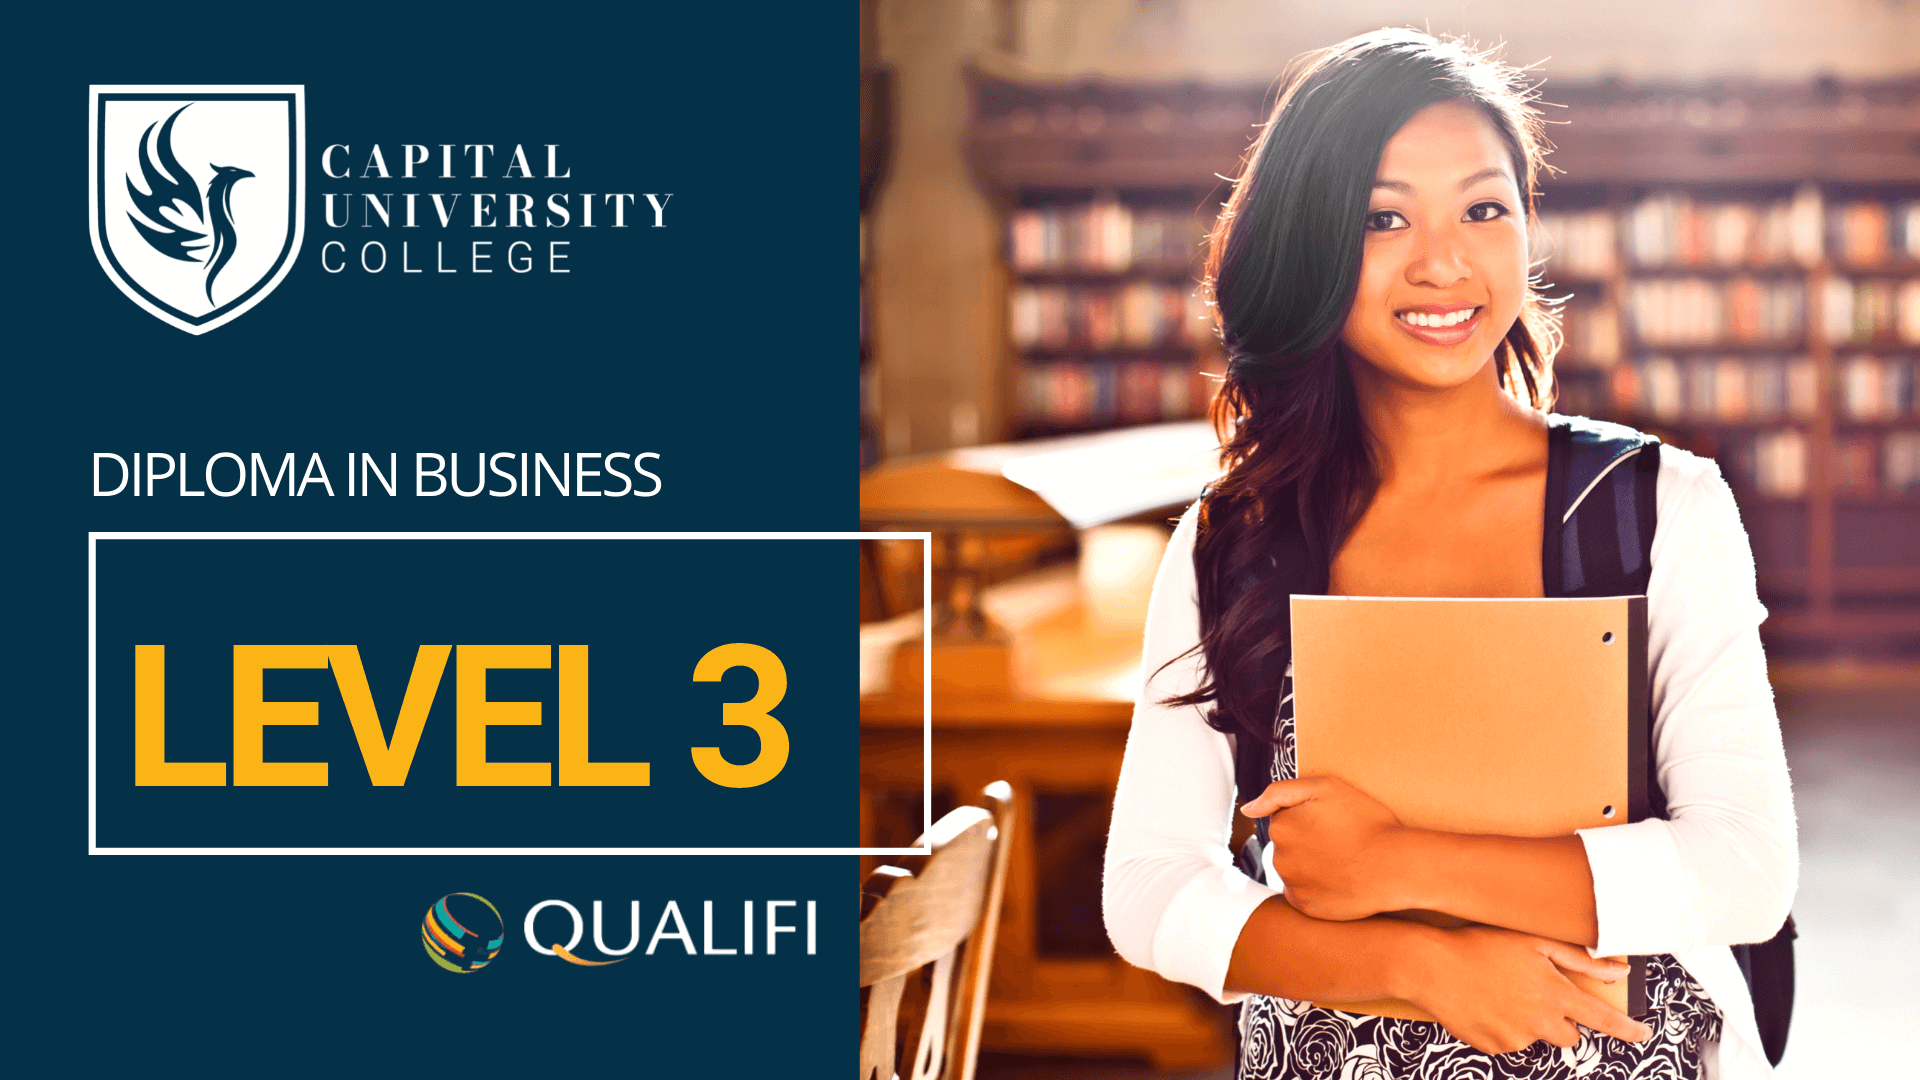 Level 3 Diploma in Business